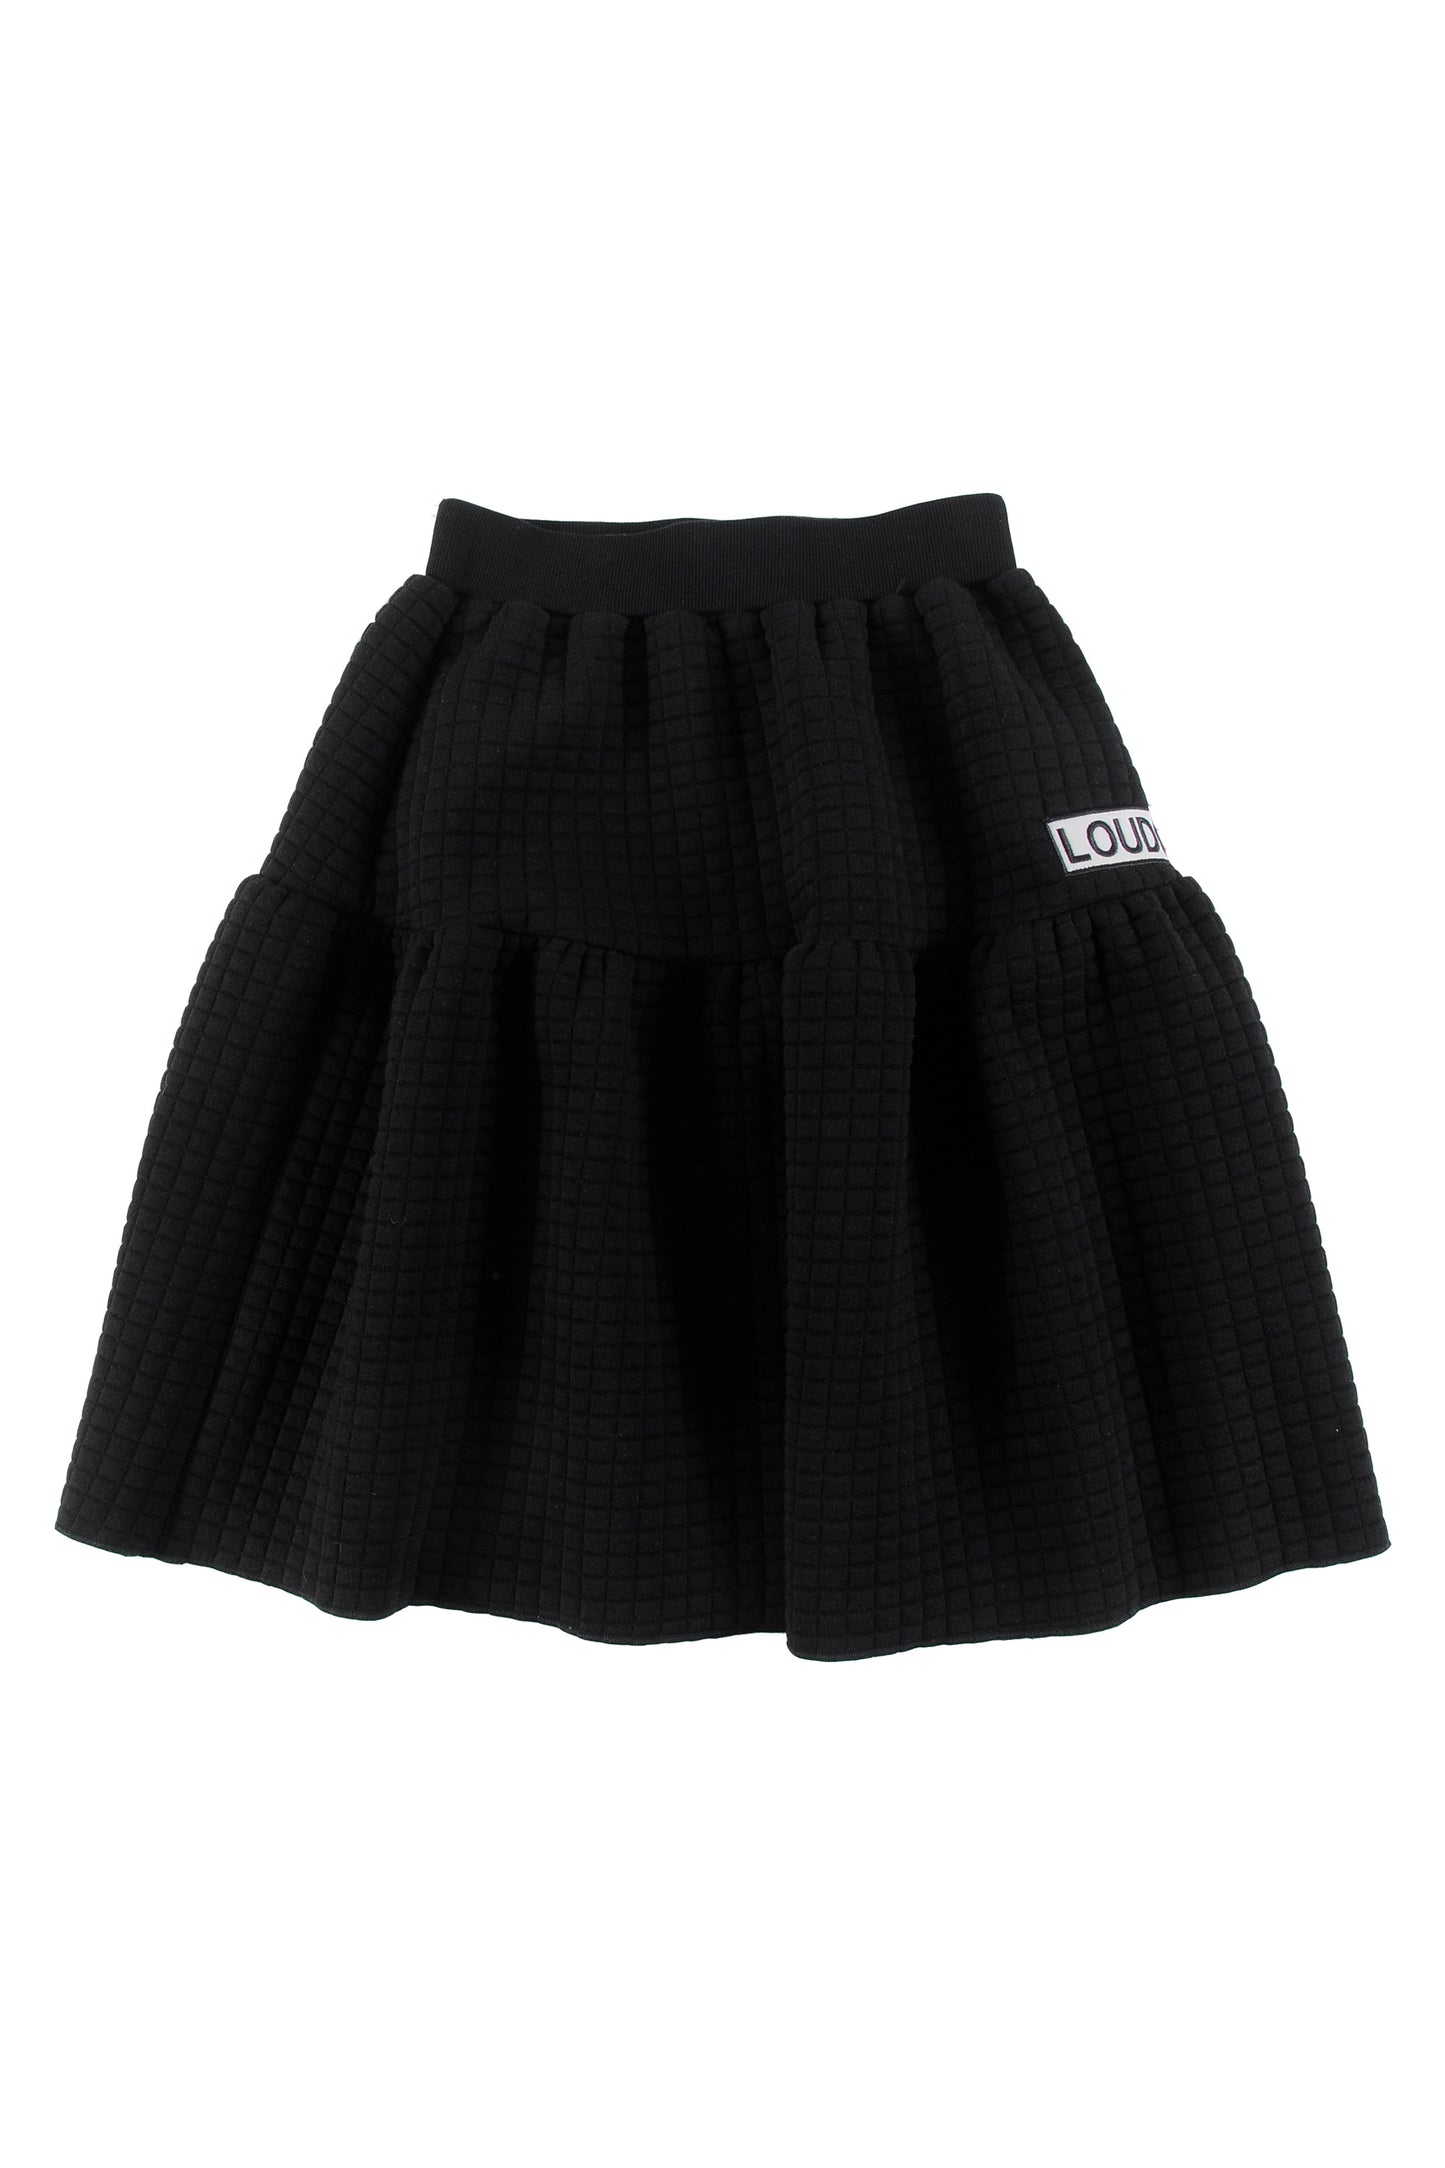 LOUD BLACK QUILTED SKIRT